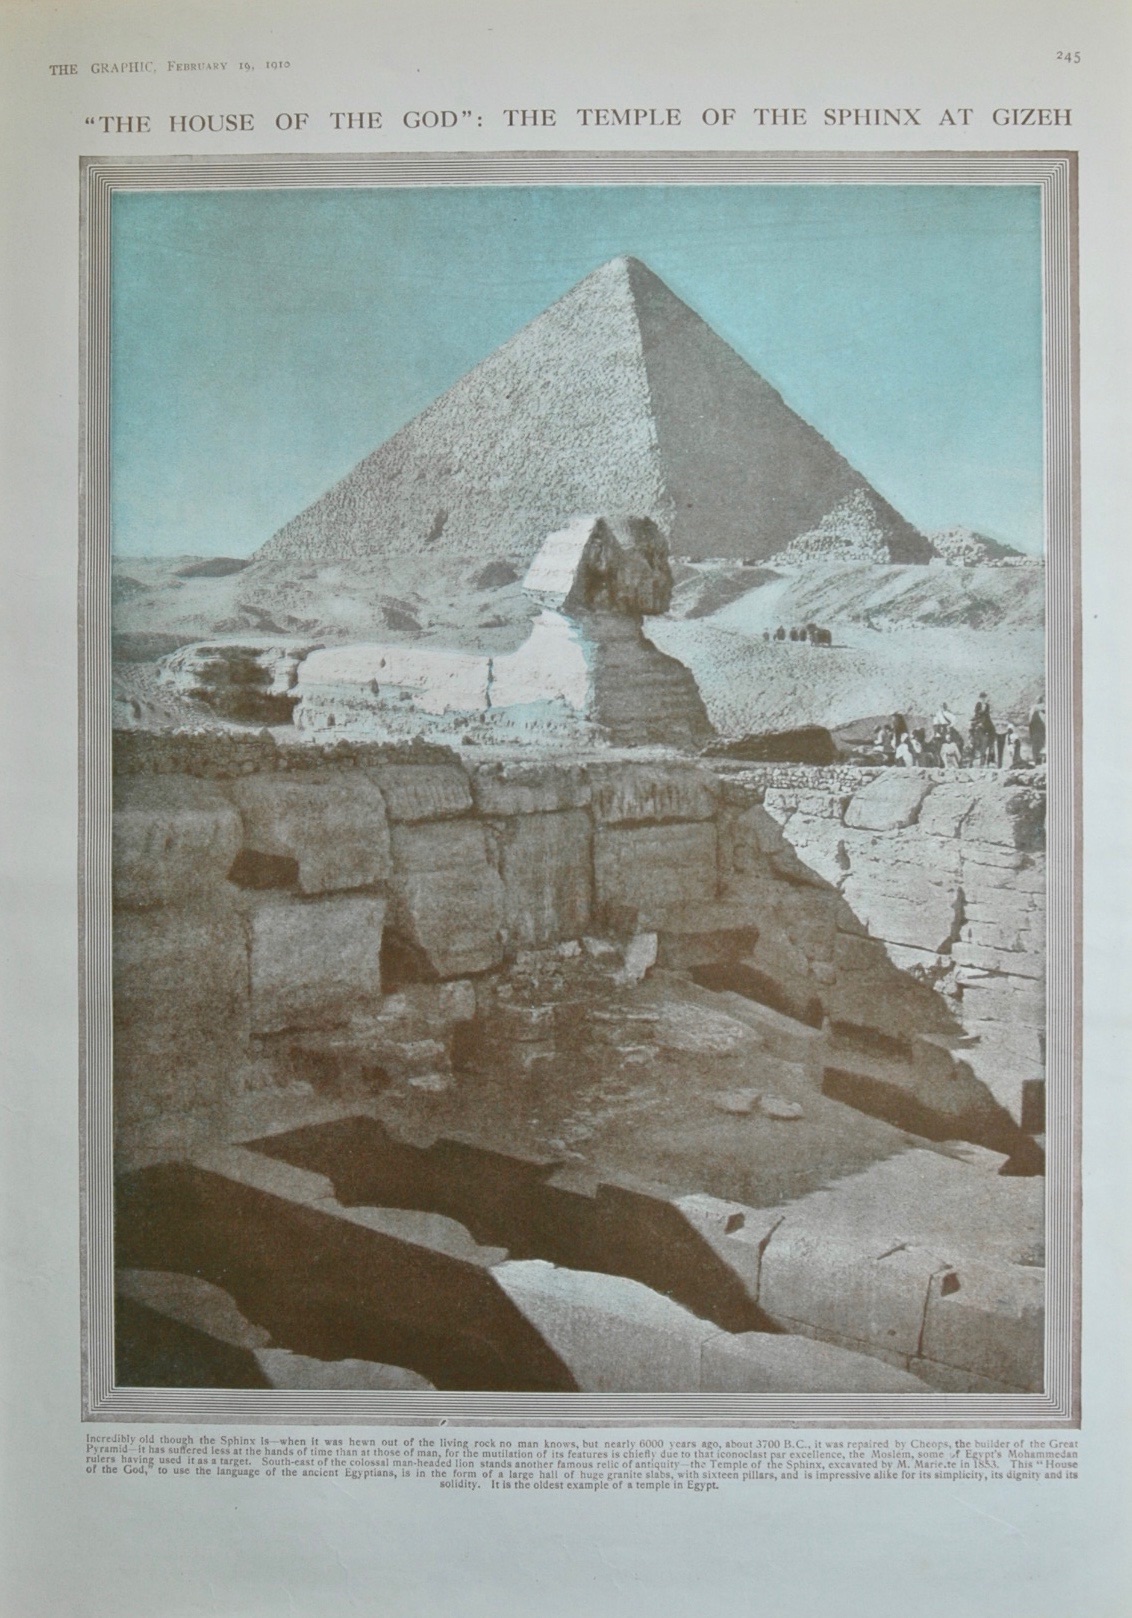 The Temple of the Sphinx at Gizeh - 1910